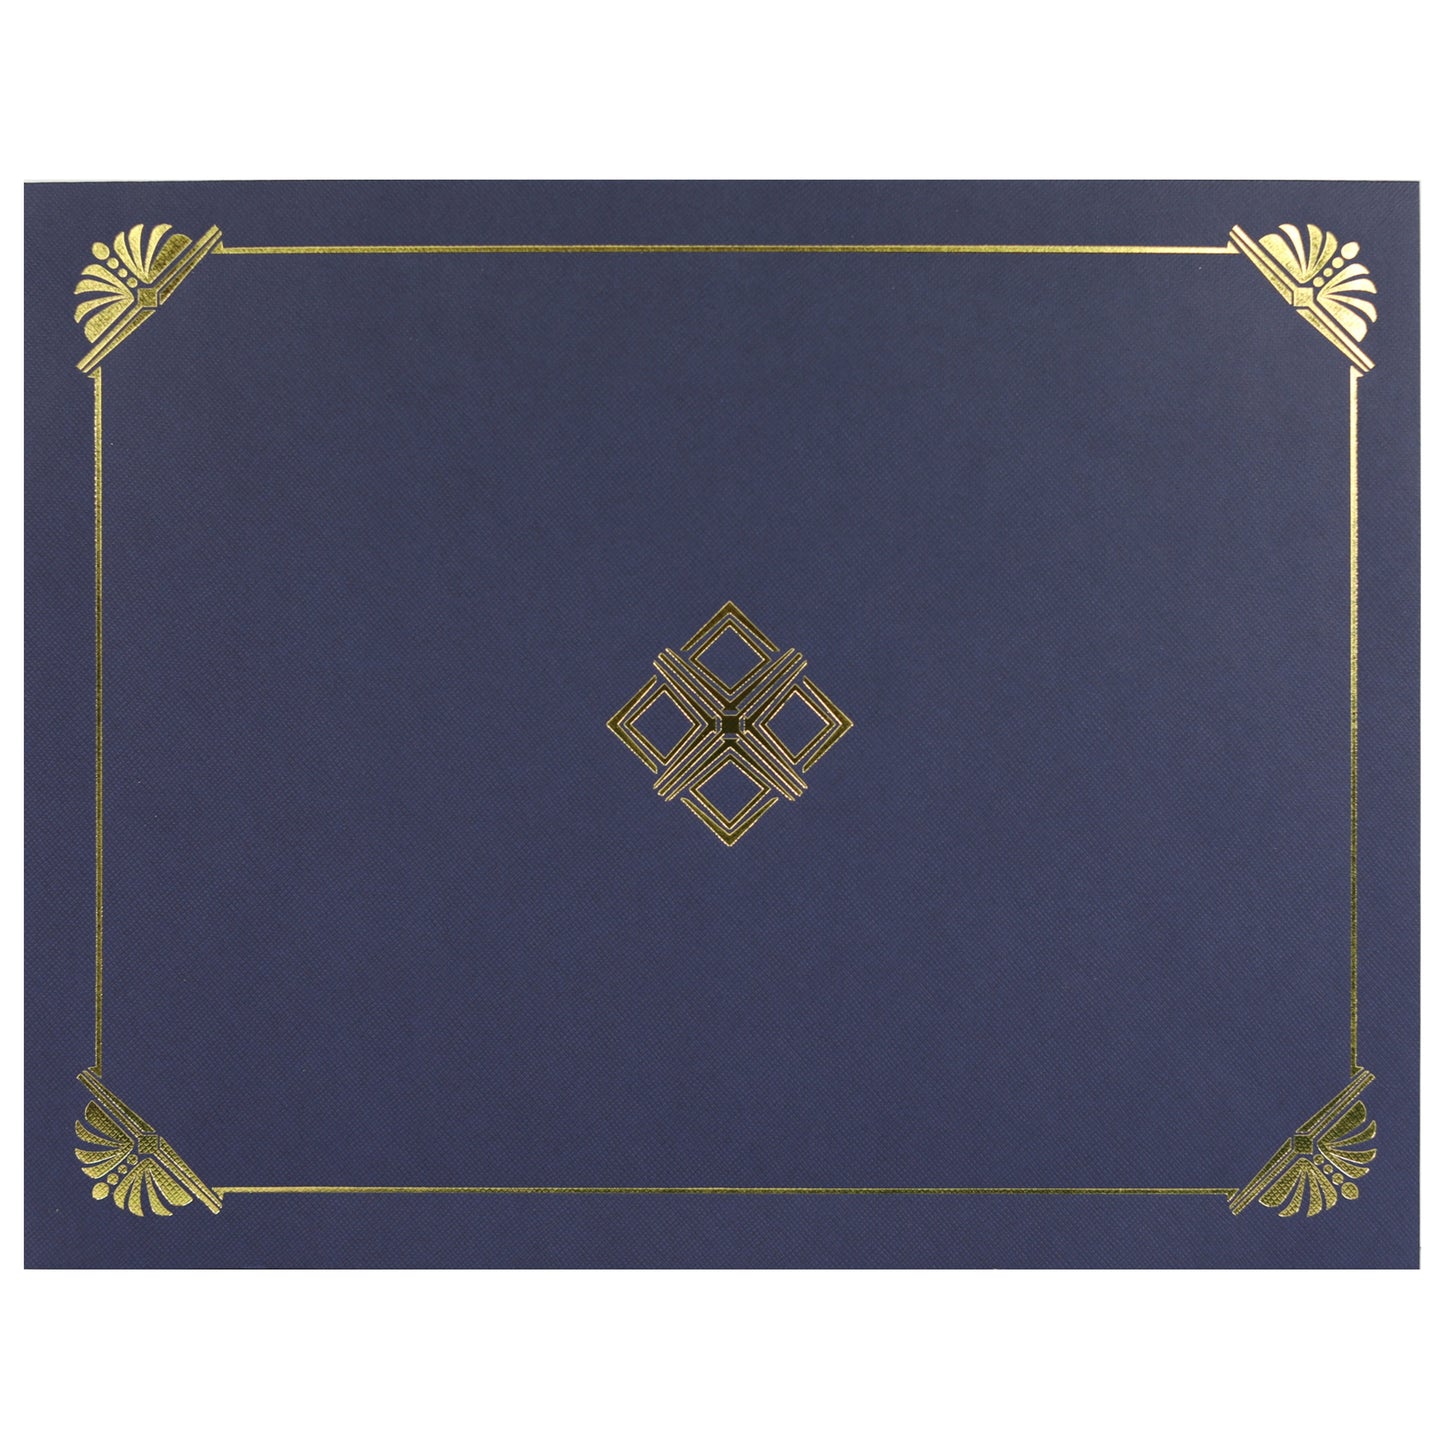 St. James® Certificate Holders/Document Covers/Diploma Holders, Navy Blue, Gold Foil, Linen Finish, Pack of 5, 83809